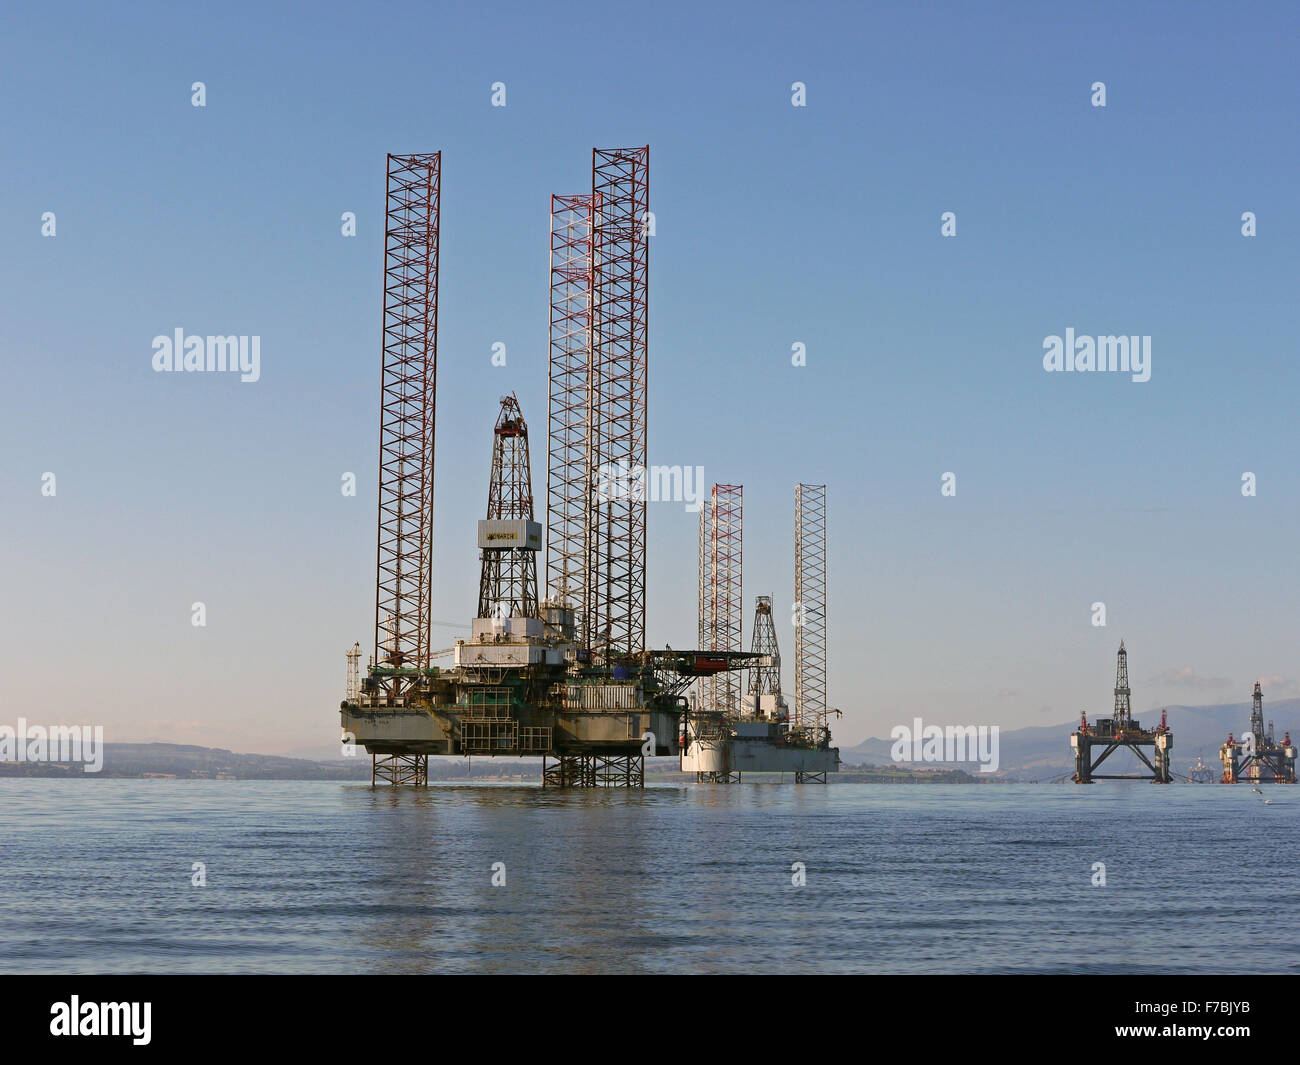 Oil rigs moored up in the Cromarty Firth for maintenance.  GSF Monarch Vila in the foreground Stock Photo